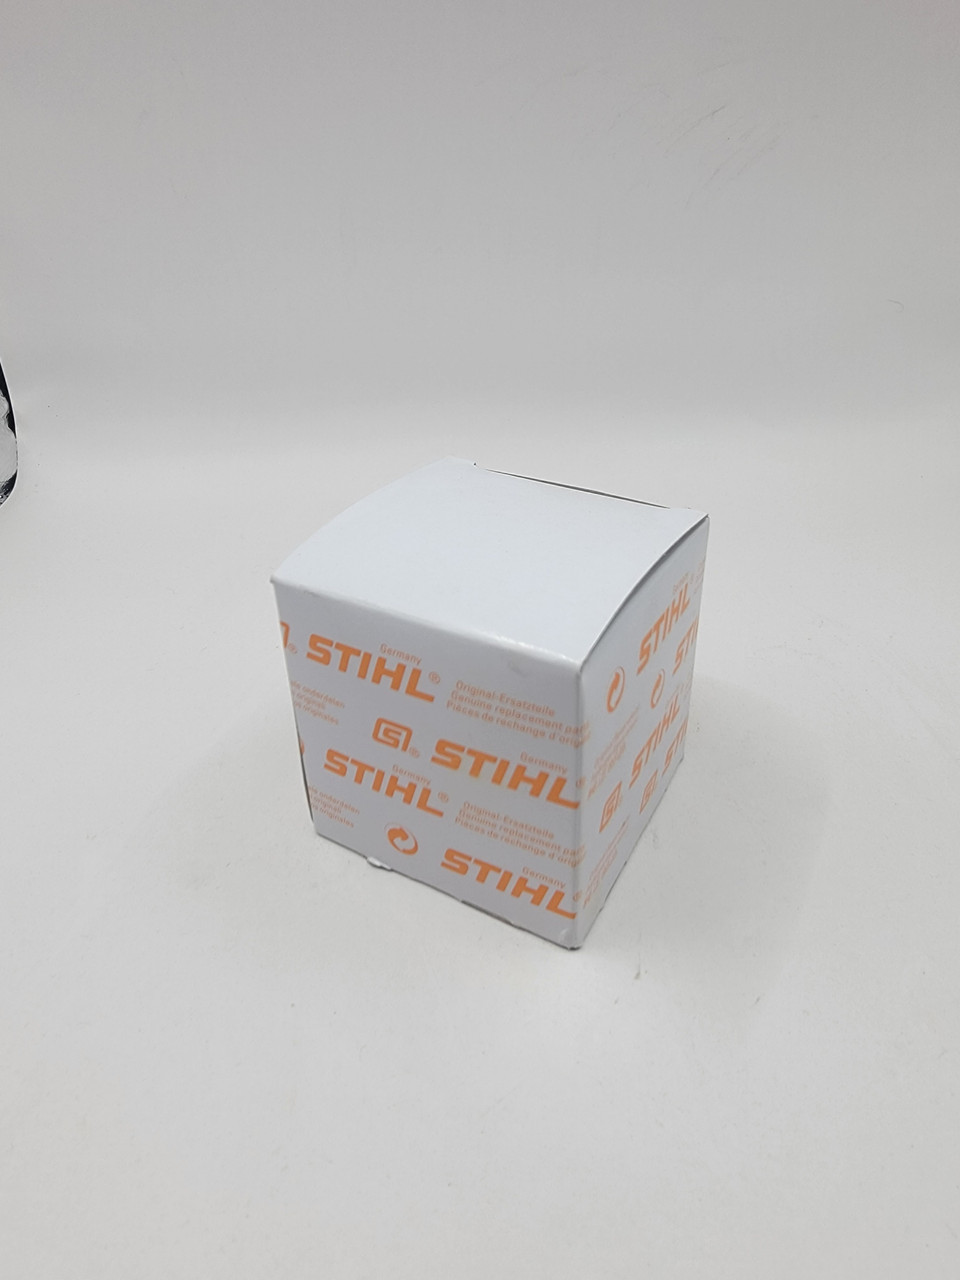 Stihl 4867 706 3400 COVER FSA 130 R one package